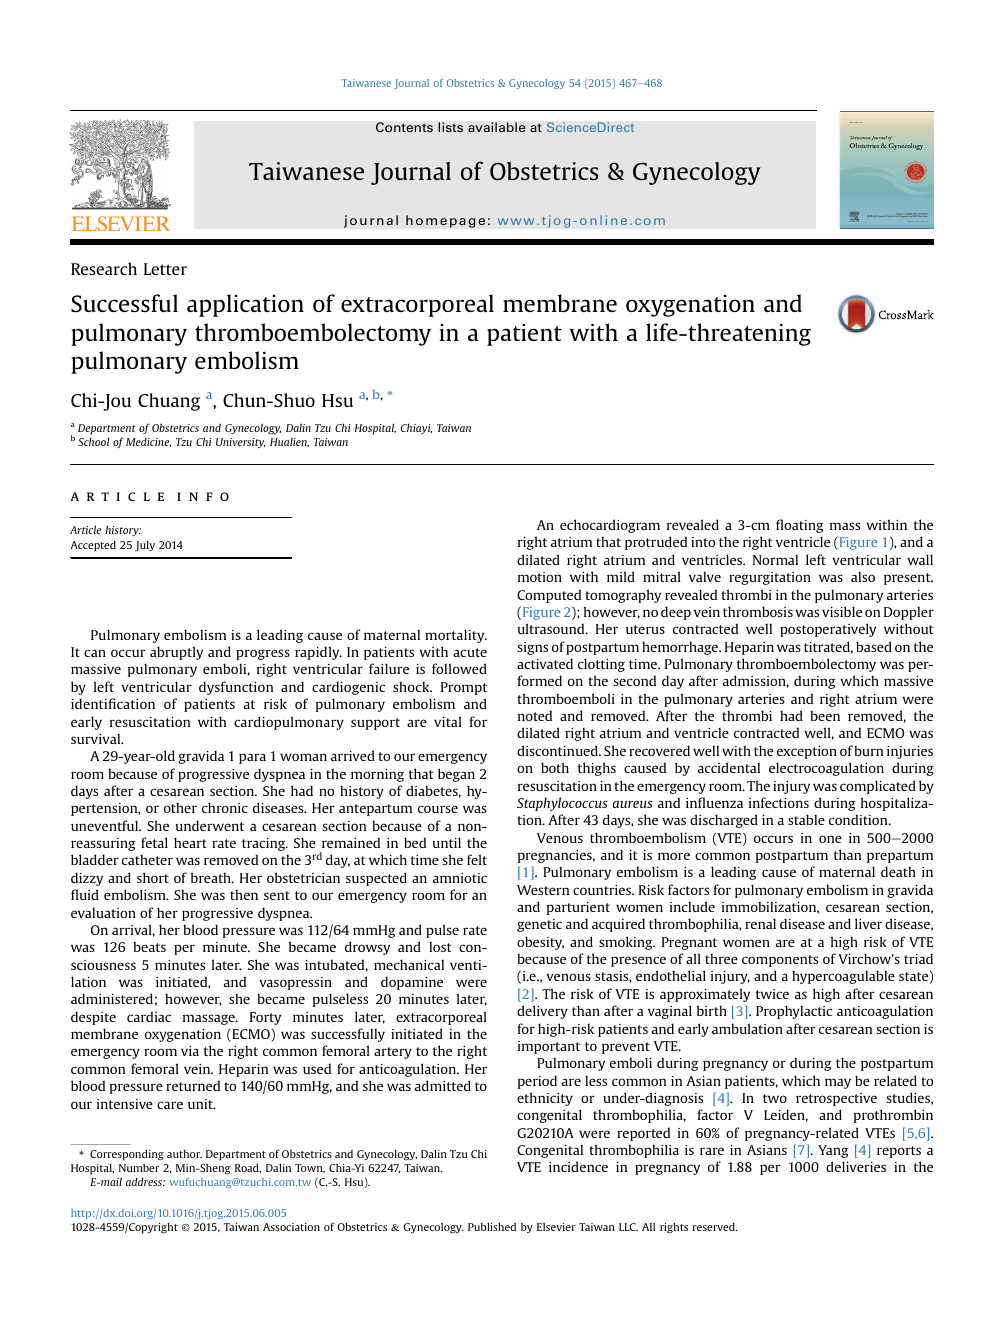 Successful Application Of Extracorporeal Membrane Oxygenation And Pulmonary Thromboembolectomy In A Patient With A Life Threatening Pulmonary Embolism Topic Of Research Paper In Clinical Medicine Download Scholarly Article Pdf And Read For